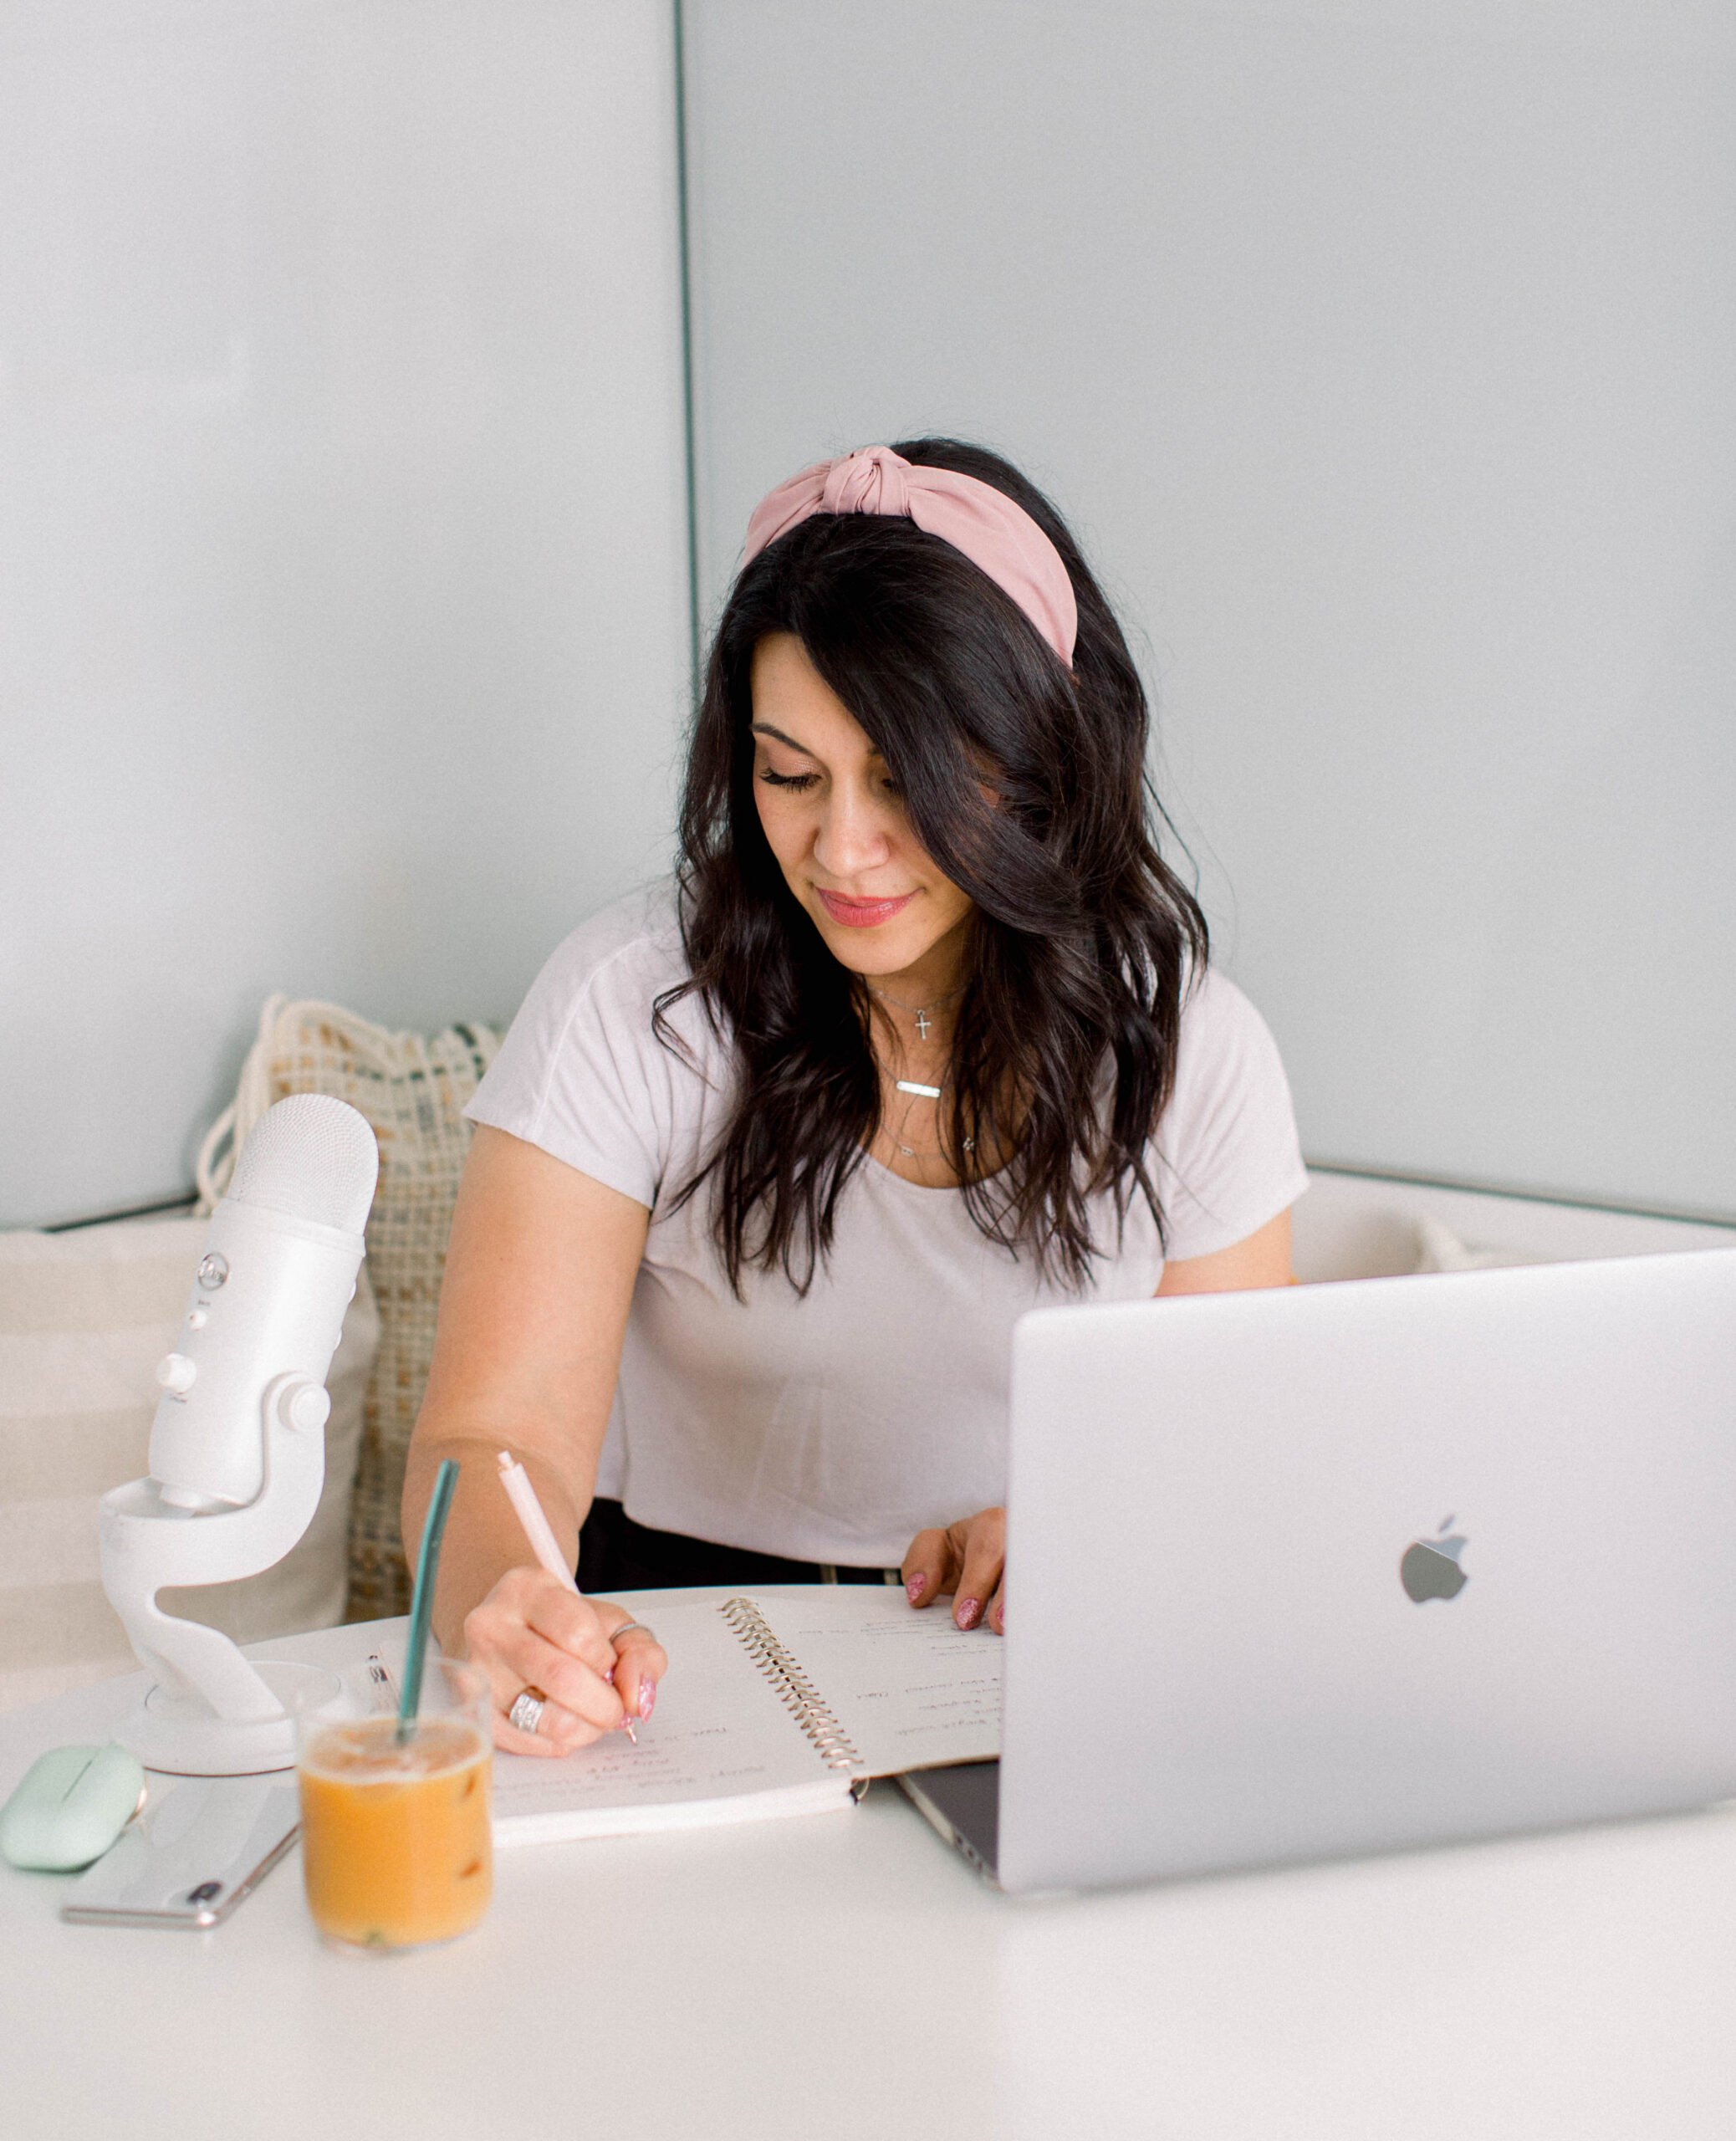 dark haired woman wearing a pink headband and a white tshirt sits at a desk. There is an open laptop on the desk, and she is writing in a journal. There is an iced coffee and podcast mic on the desk.